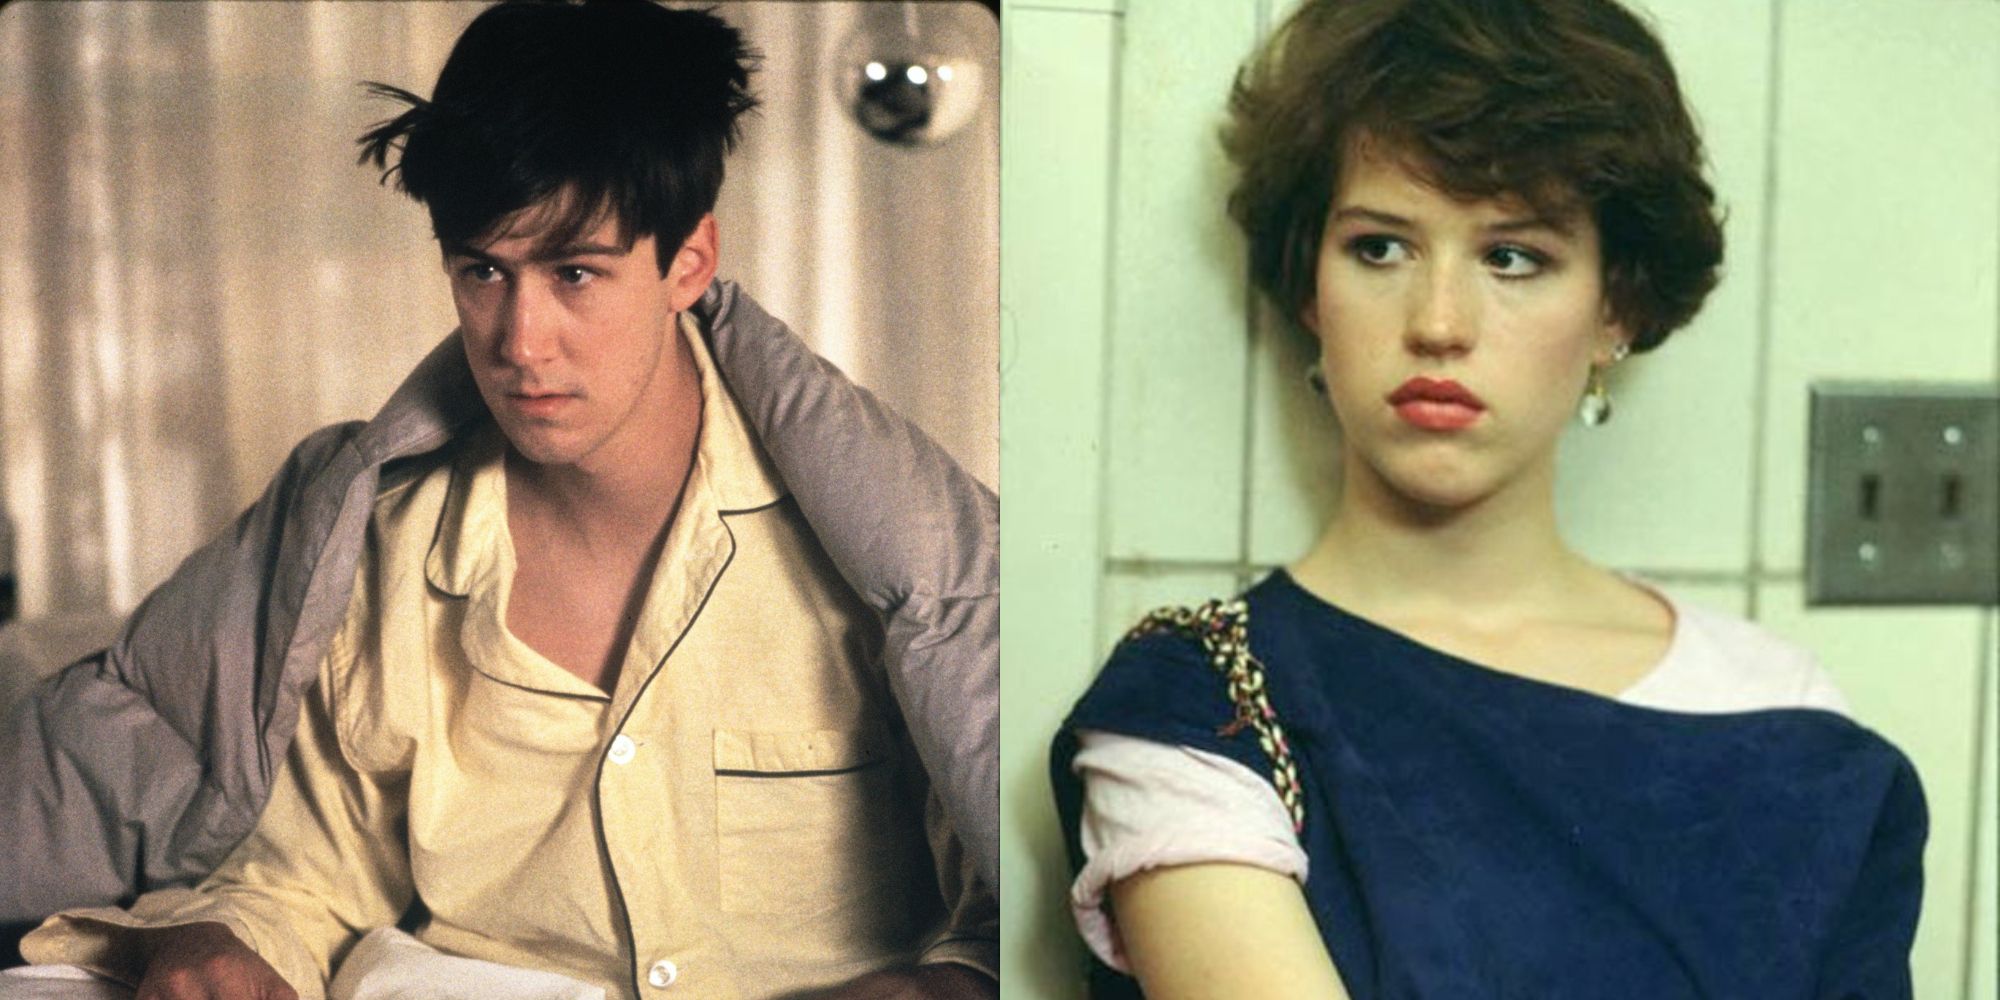 Cameron in Ferris Bueller's Day Off and Samantha in Sixteen Candles